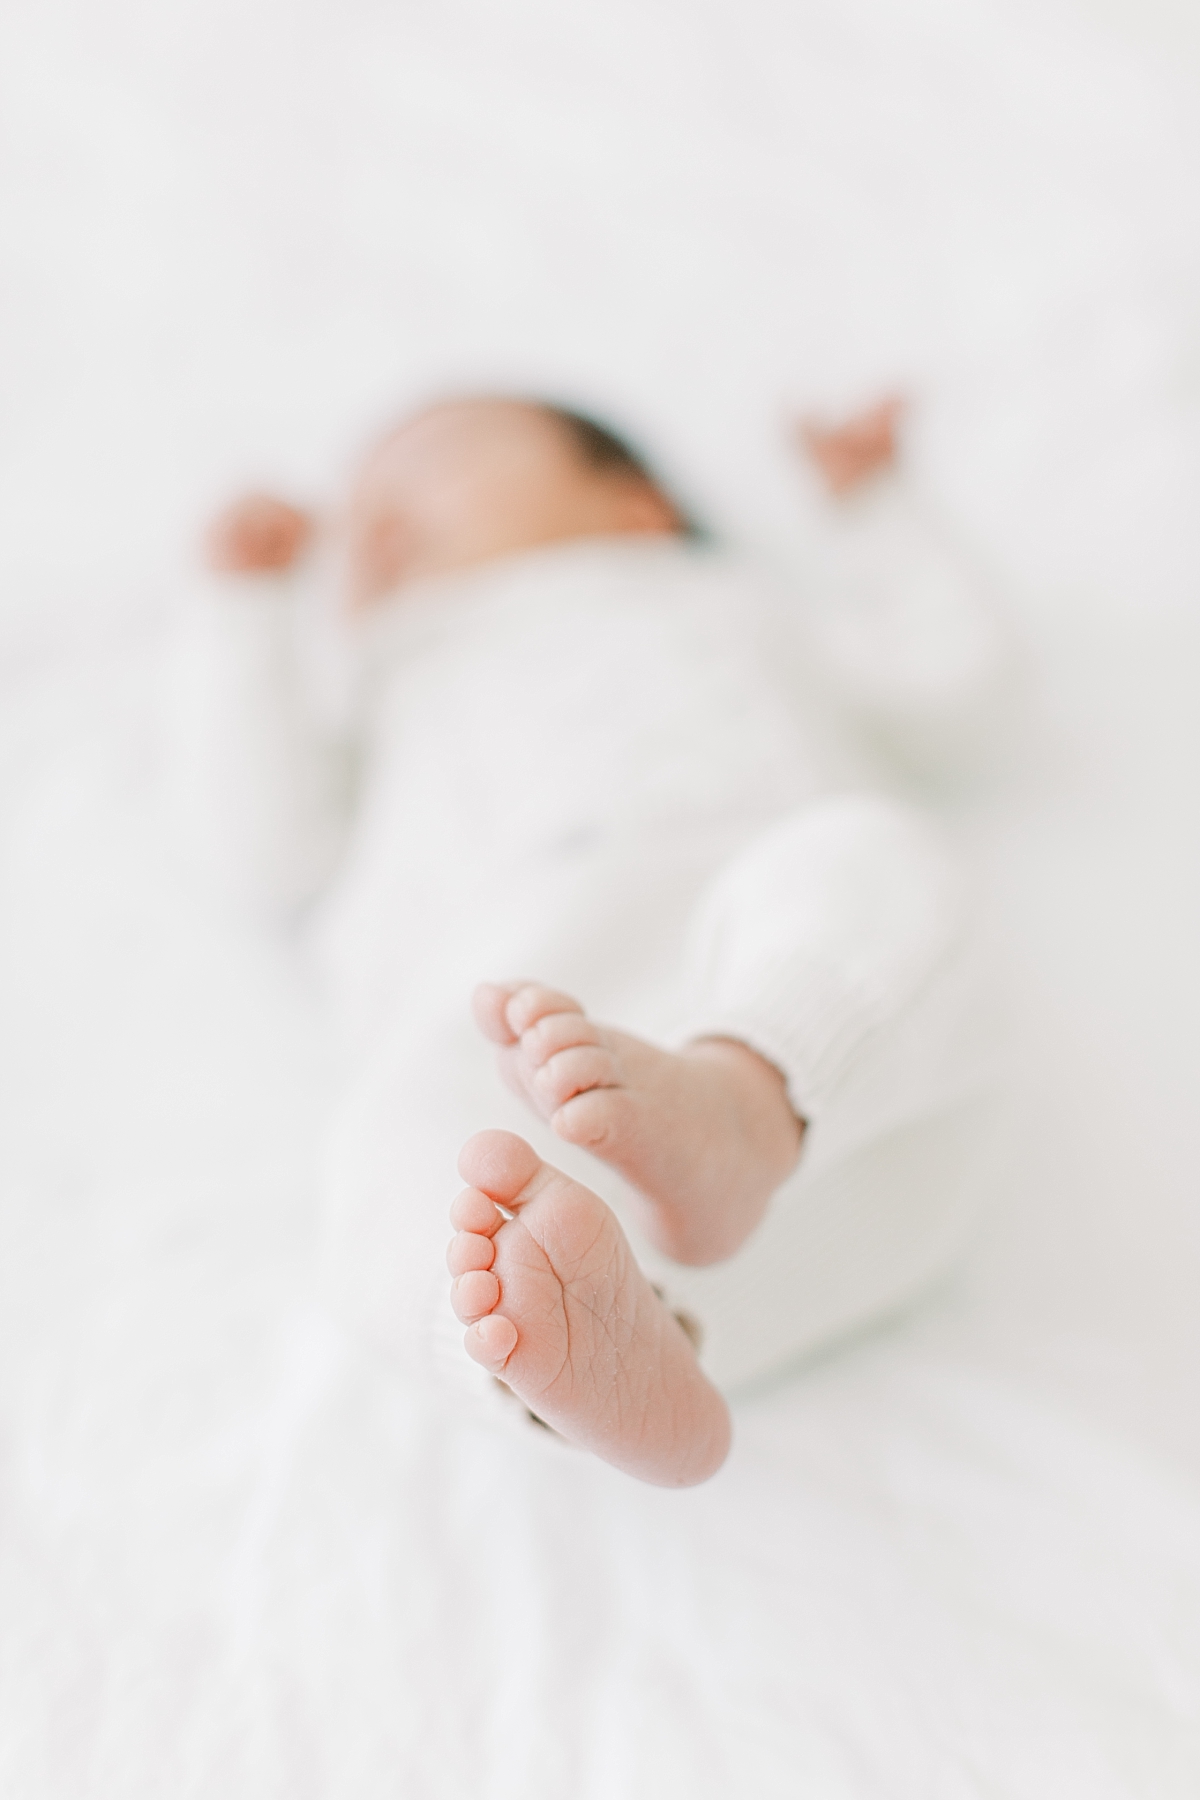 rebecca shivers photography, lancaster, newborn, maternity, photographer, central pa, berks, baby toes